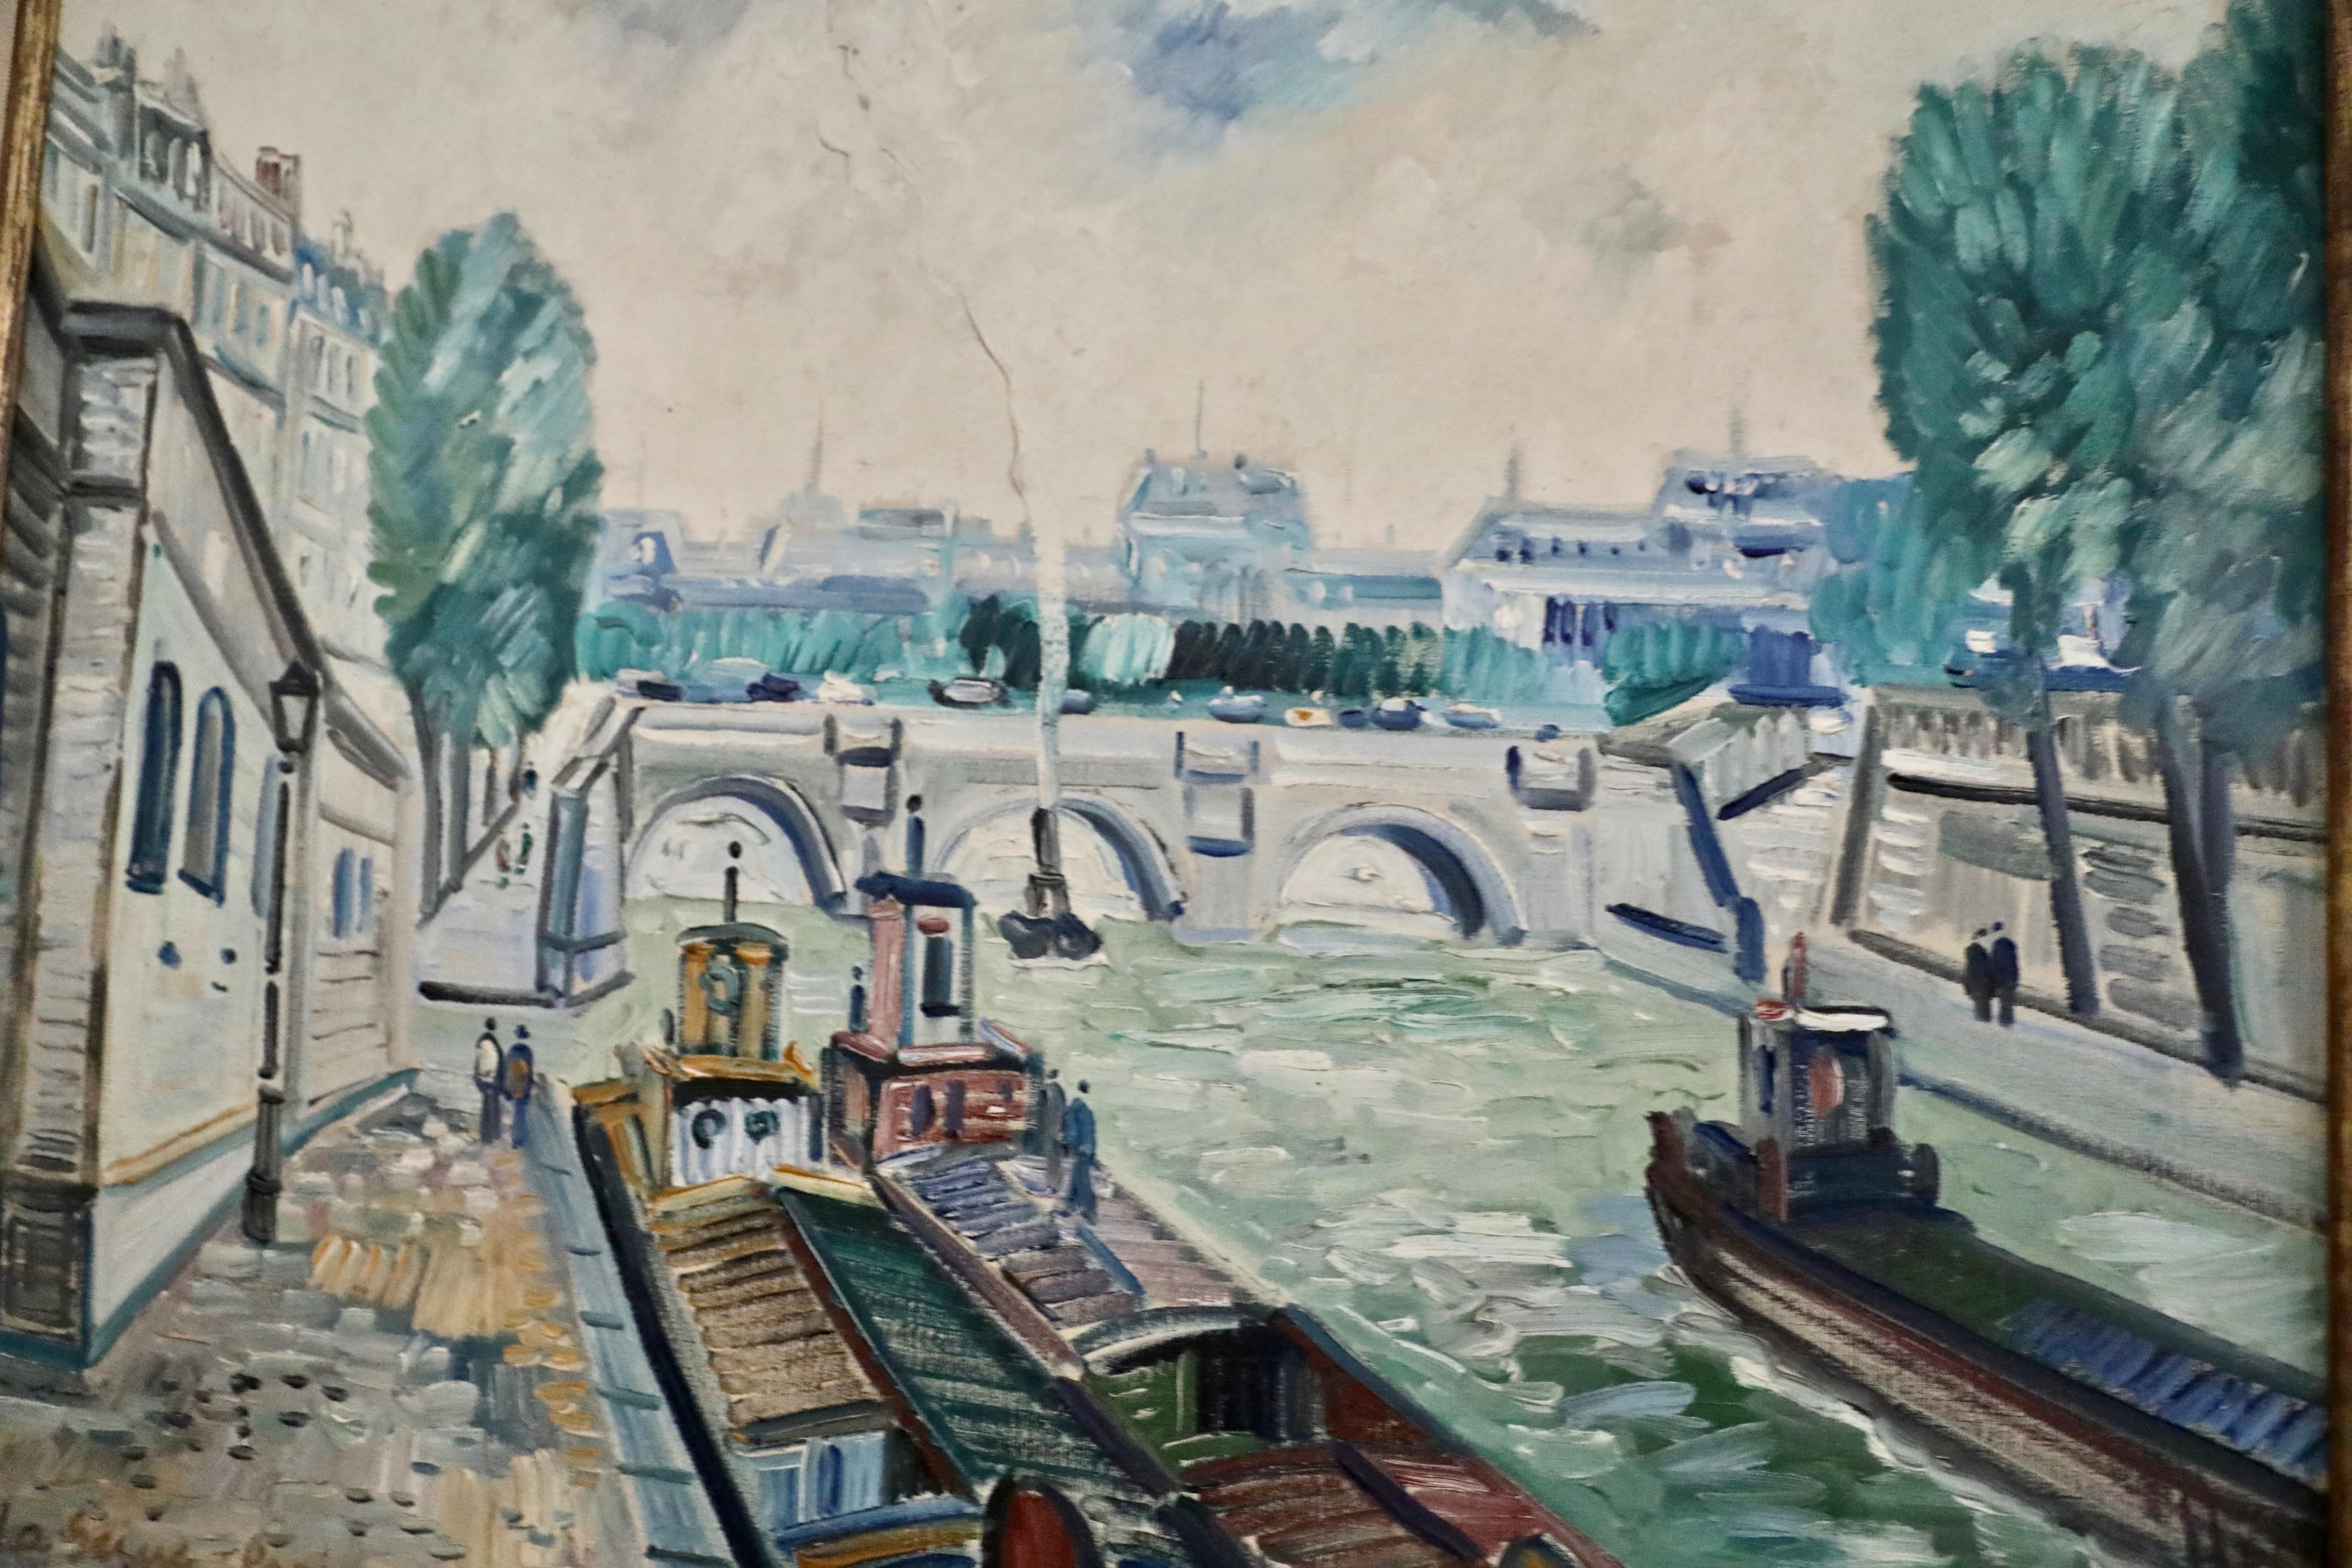 This is a charming depiction of the Seine painted by Johannes Schiefer during, we think, the period sometime between 1935 and 1955. If you look closely at the photo you can see Schiefer's use of impasto to create the smokestack on the tug boat. The